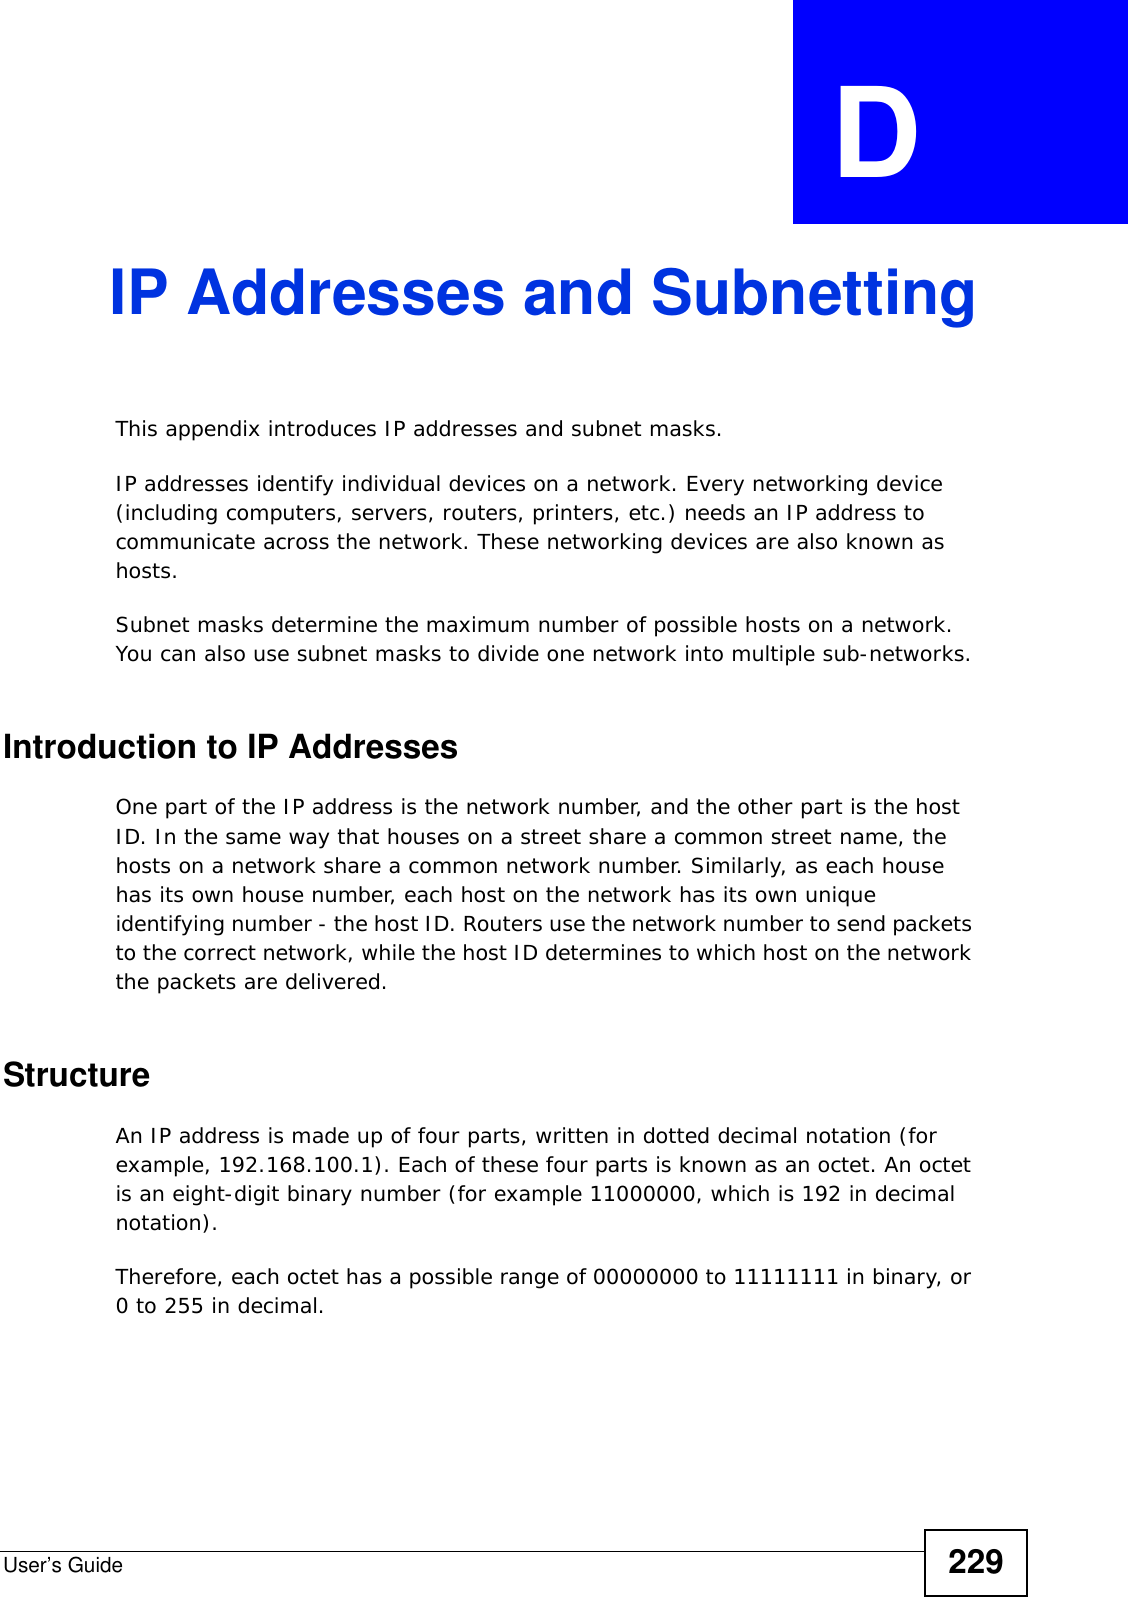 User’s Guide 229APPENDIX  D IP Addresses and SubnettingThis appendix introduces IP addresses and subnet masks. IP addresses identify individual devices on a network. Every networking device (including computers, servers, routers, printers, etc.) needs an IP address to communicate across the network. These networking devices are also known as hosts.Subnet masks determine the maximum number of possible hosts on a network. You can also use subnet masks to divide one network into multiple sub-networks.Introduction to IP AddressesOne part of the IP address is the network number, and the other part is the host ID. In the same way that houses on a street share a common street name, the hosts on a network share a common network number. Similarly, as each house has its own house number, each host on the network has its own unique identifying number - the host ID. Routers use the network number to send packets to the correct network, while the host ID determines to which host on the network the packets are delivered.StructureAn IP address is made up of four parts, written in dotted decimal notation (for example, 192.168.100.1). Each of these four parts is known as an octet. An octet is an eight-digit binary number (for example 11000000, which is 192 in decimal notation). Therefore, each octet has a possible range of 00000000 to 11111111 in binary, or 0 to 255 in decimal.